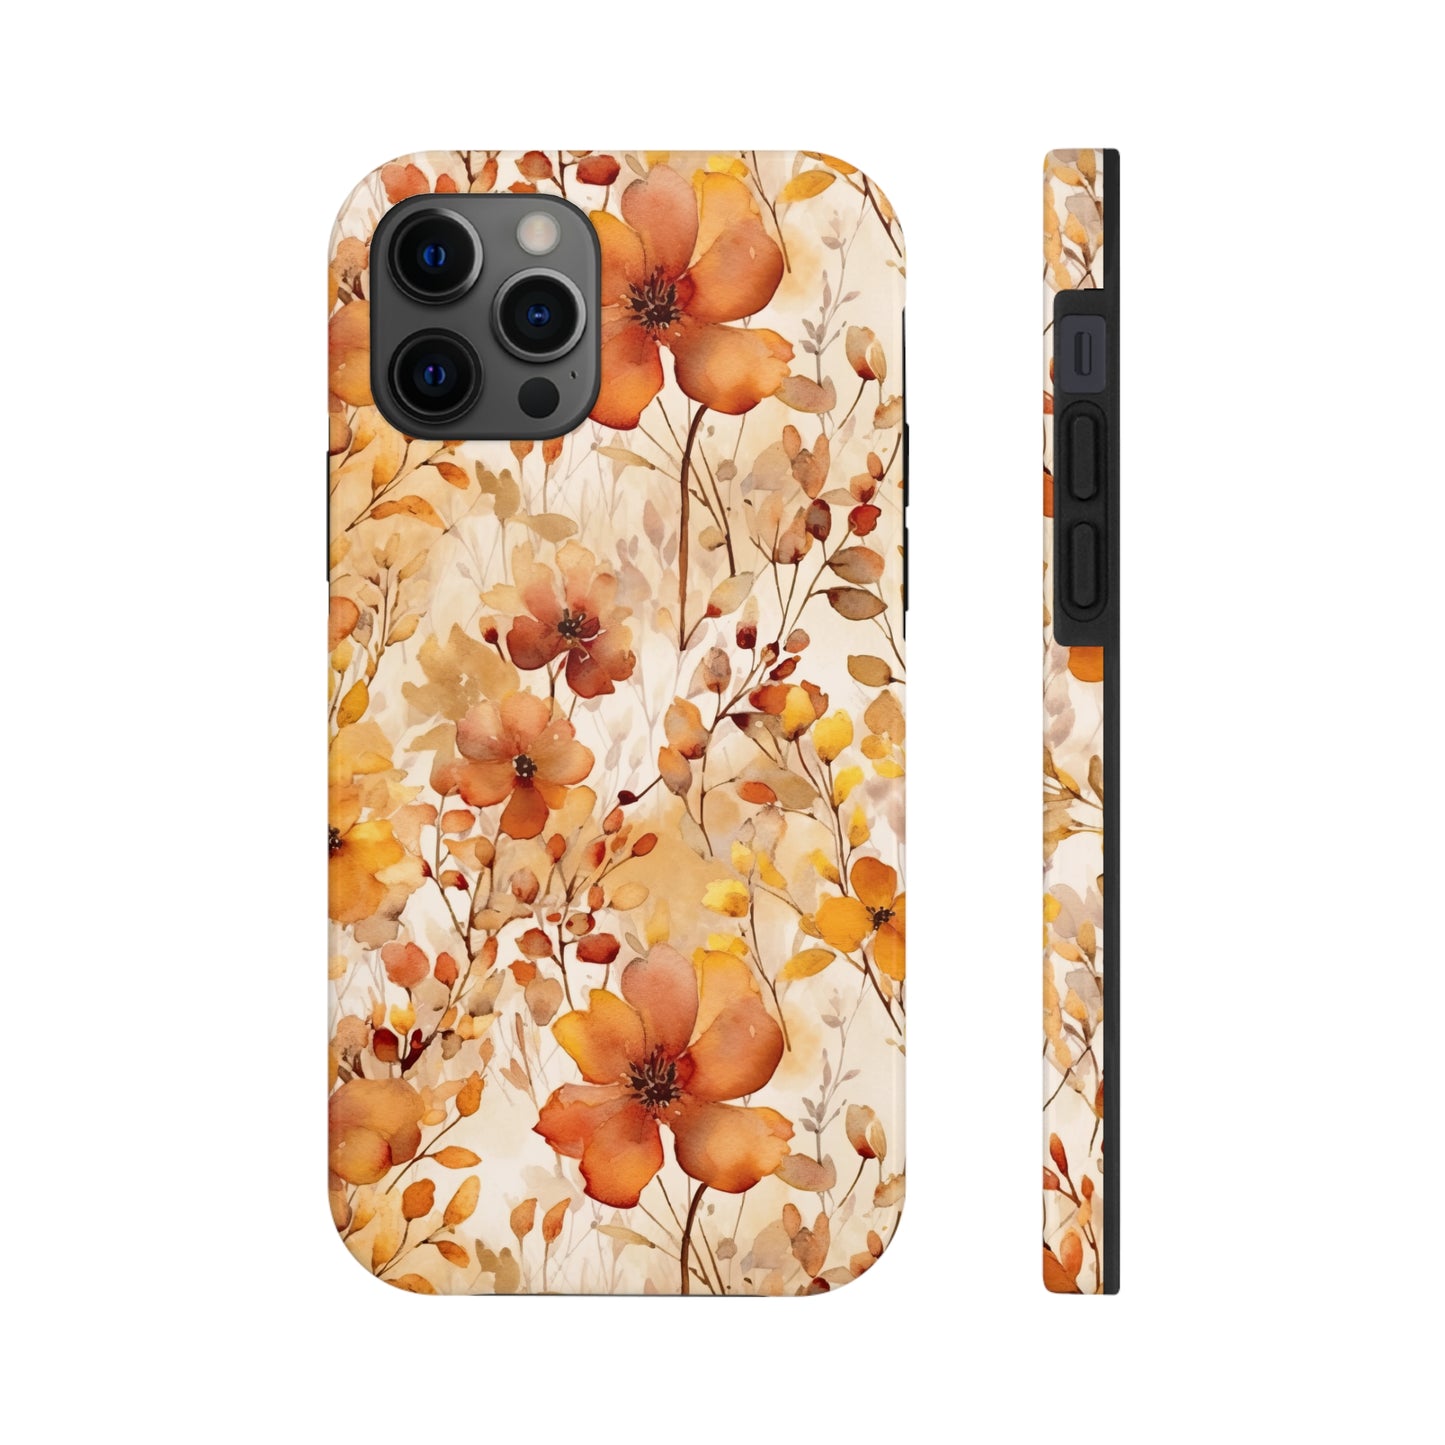 fall floral iphone case with orange, yellow and brown flower and leaf print